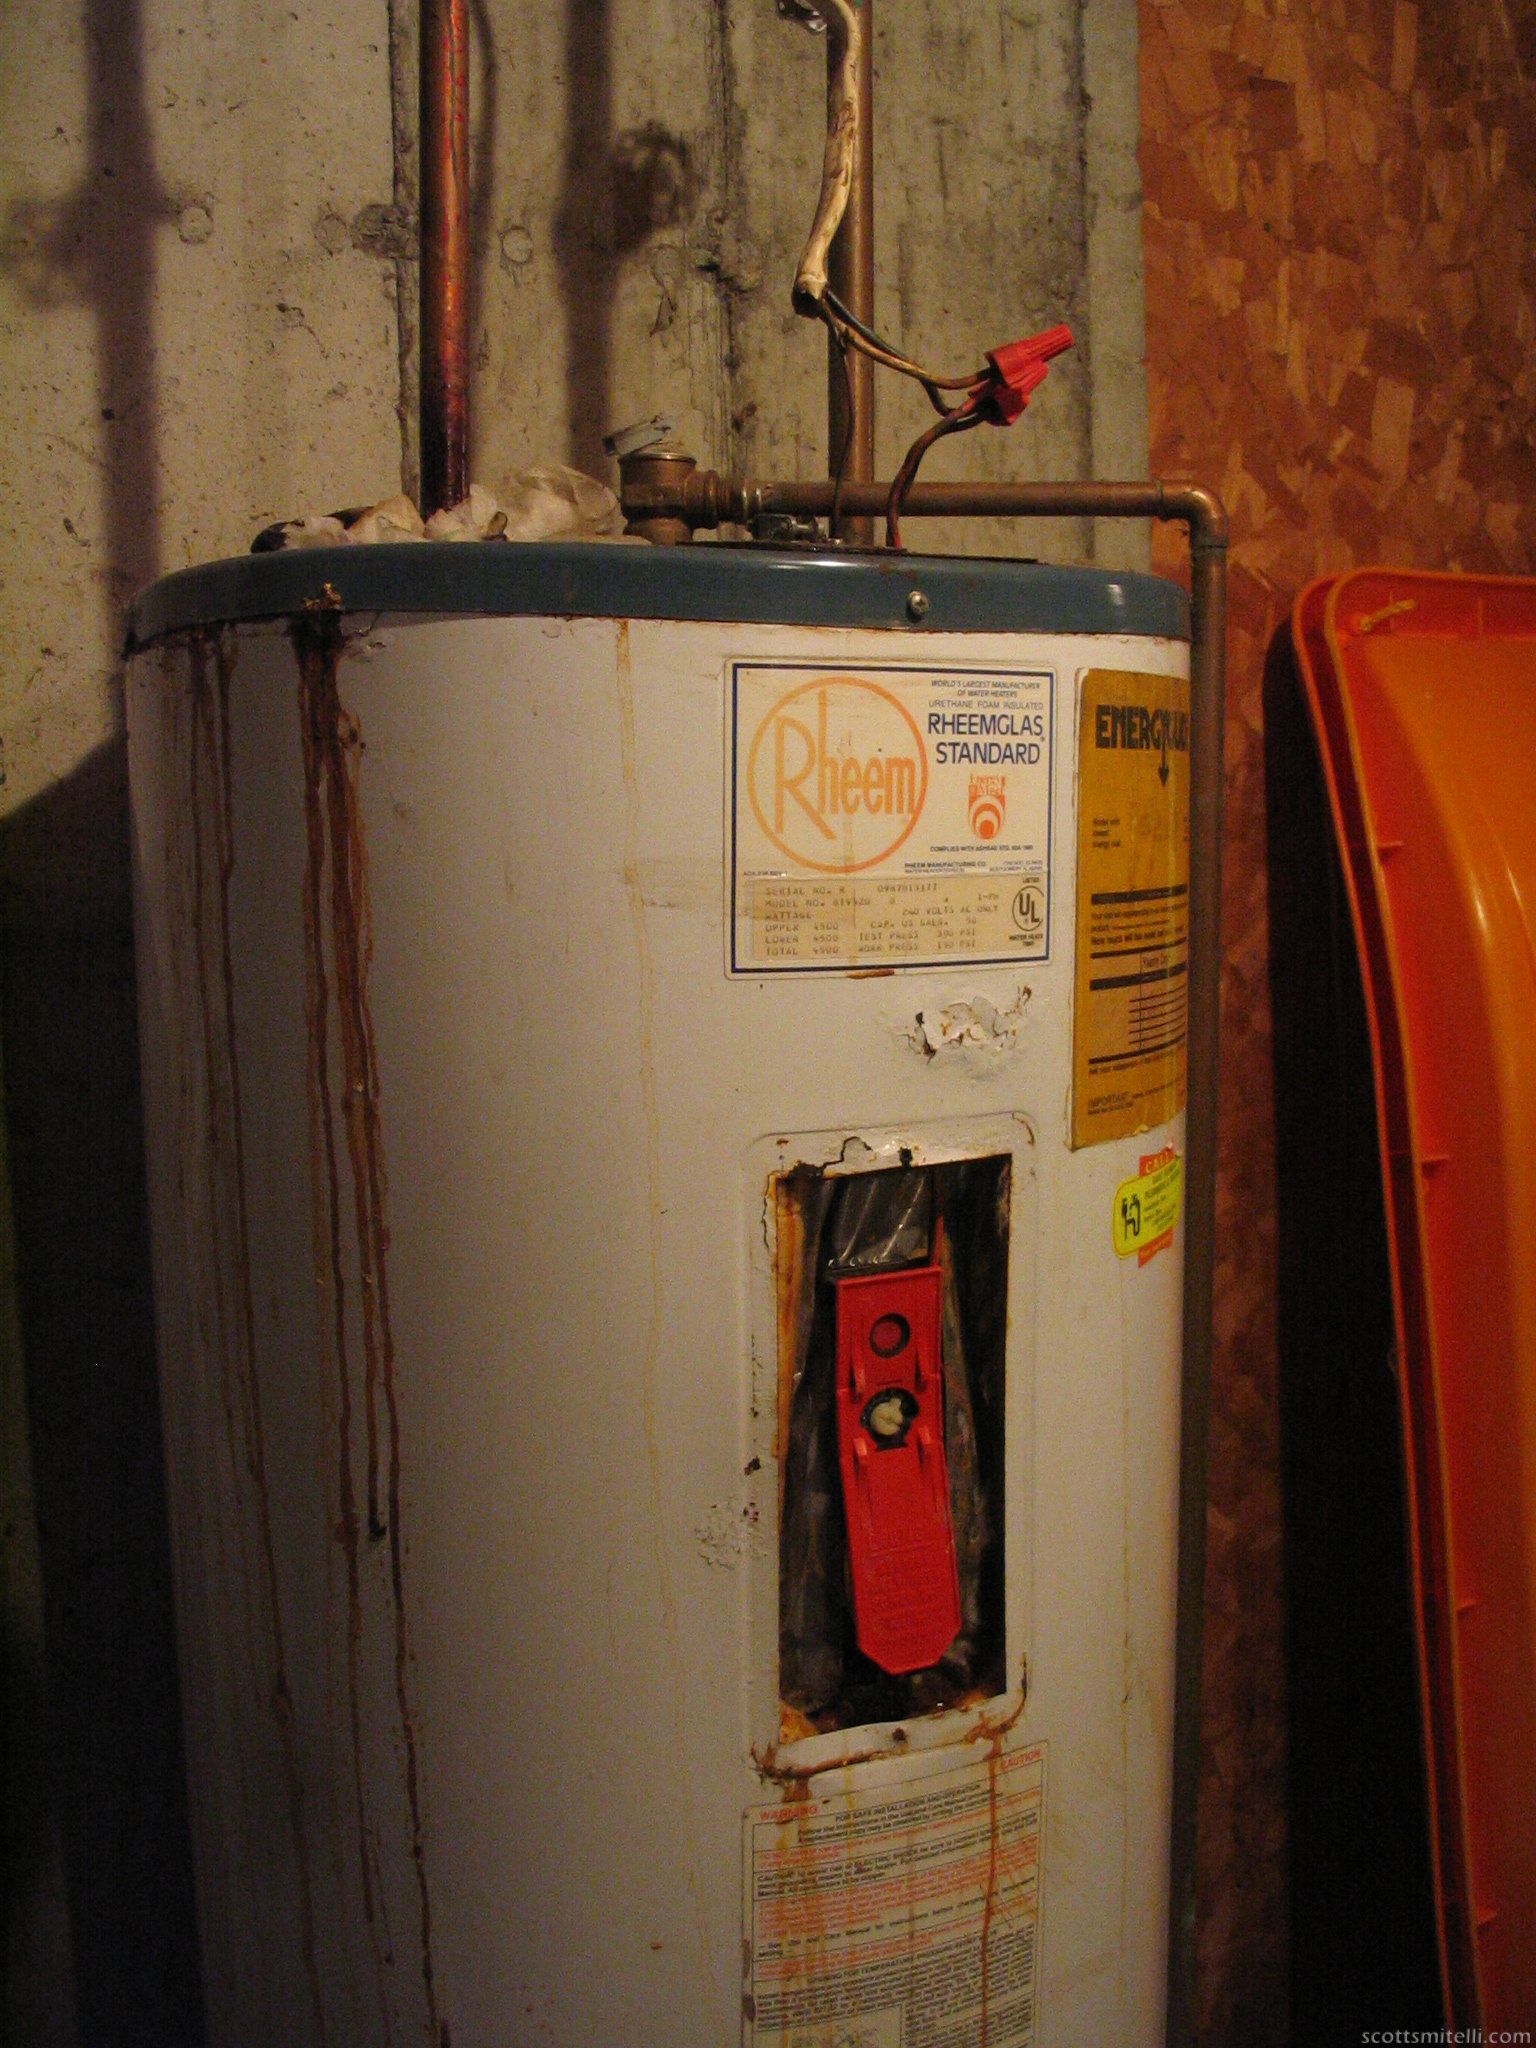 The water heater, freshly repaired.